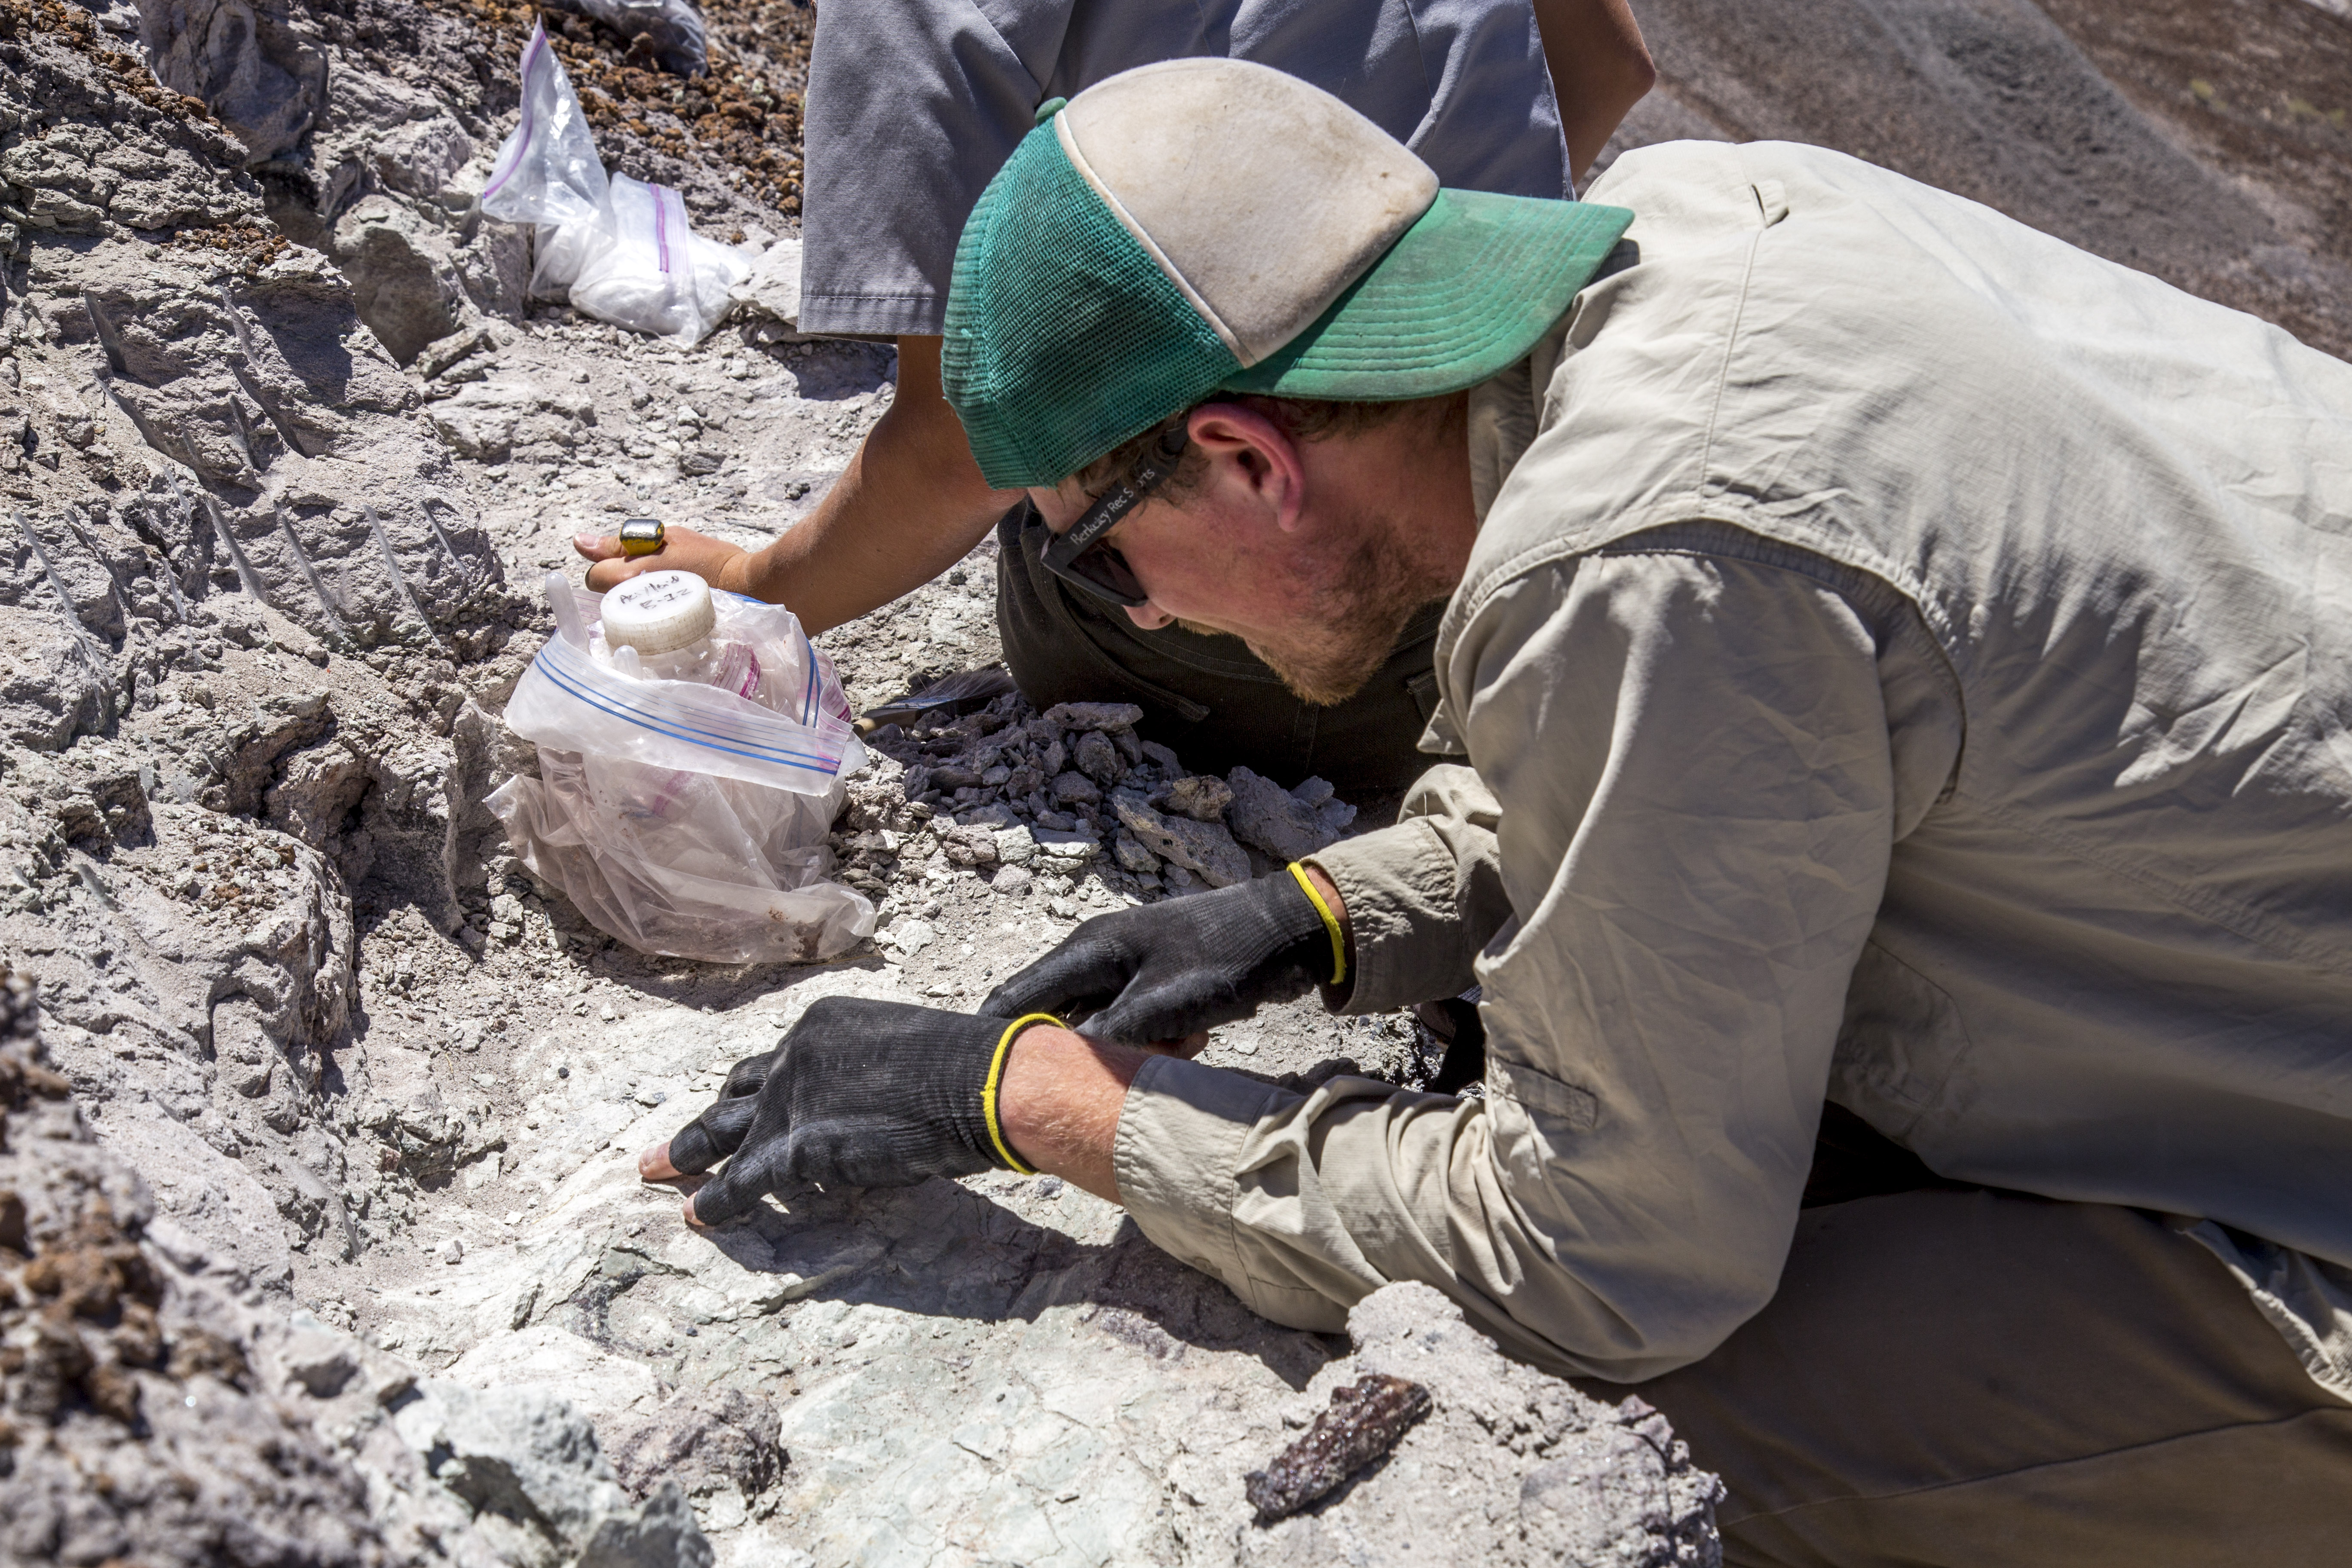 Covered in sweat and dirt, a paleontologist carefully removes gray dirt from a sun-bleached fossil.